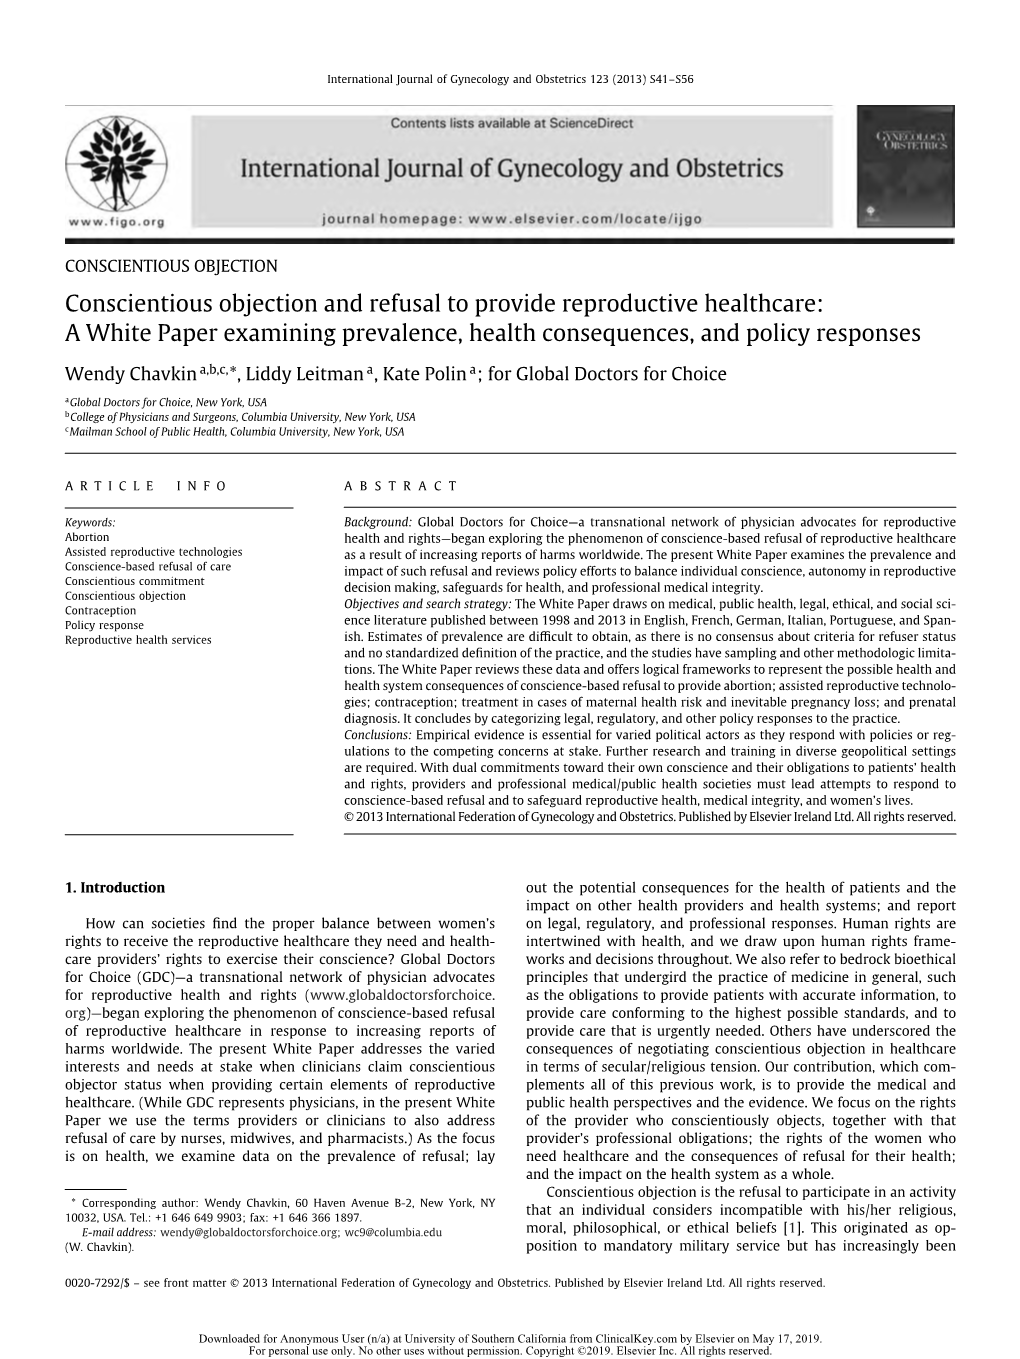 Conscientious Objection and Refusal to Provide Reproductive Healthcare: a White Paper Examining Prevalence, Health Consequences, and Policy Responses